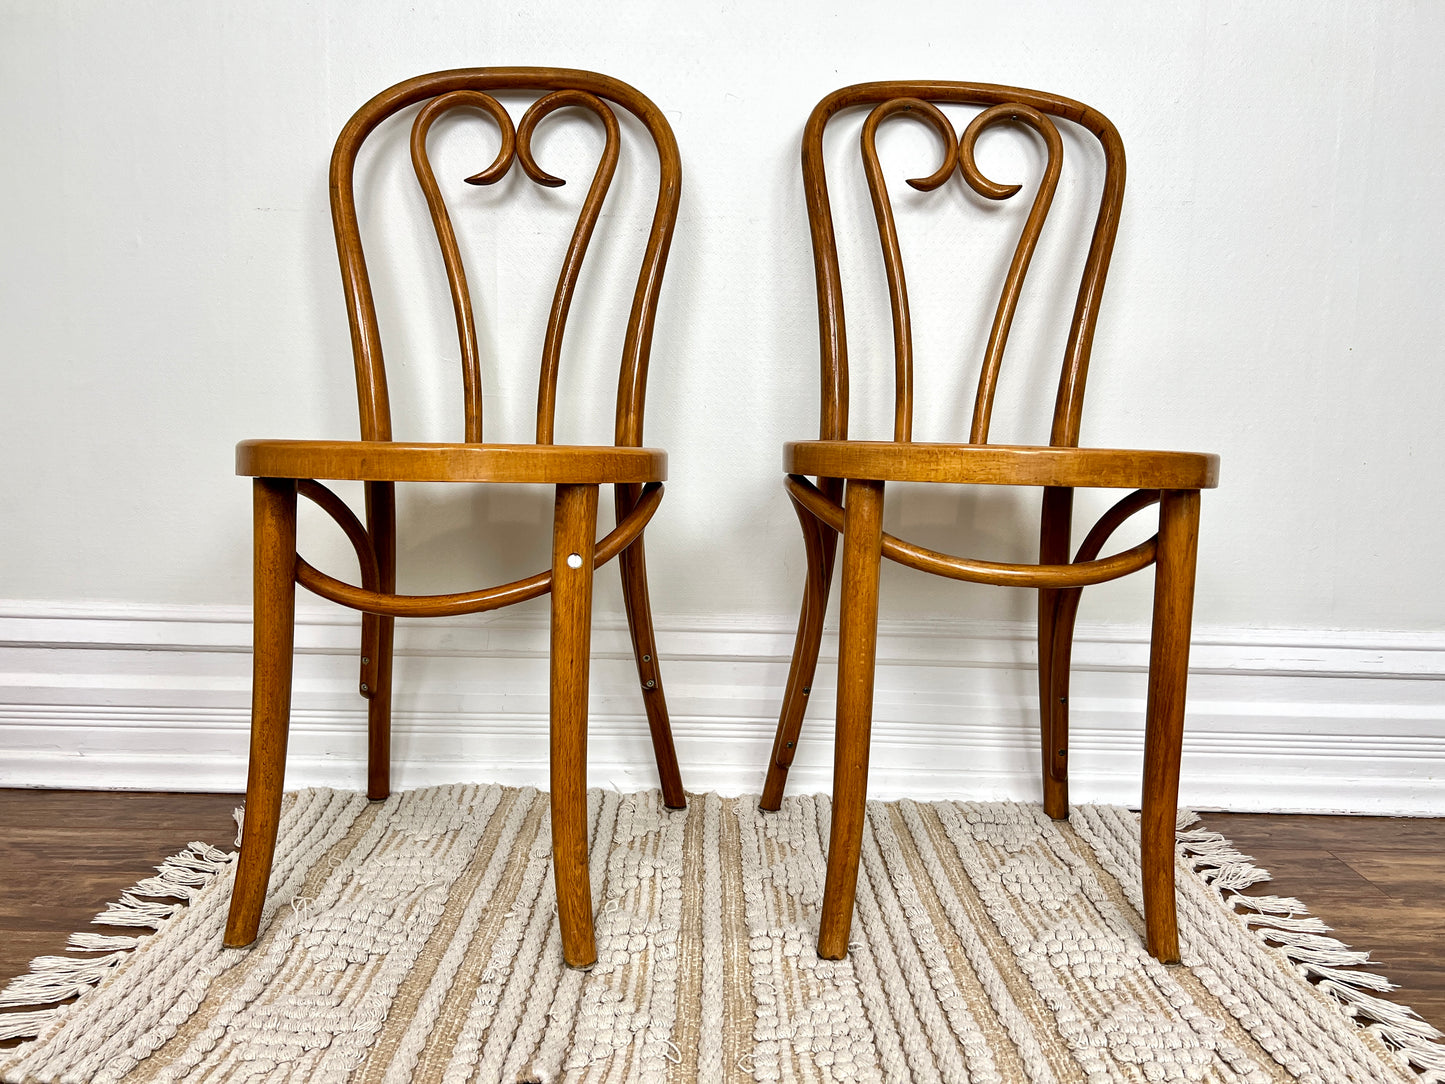 The Constanta Chairs